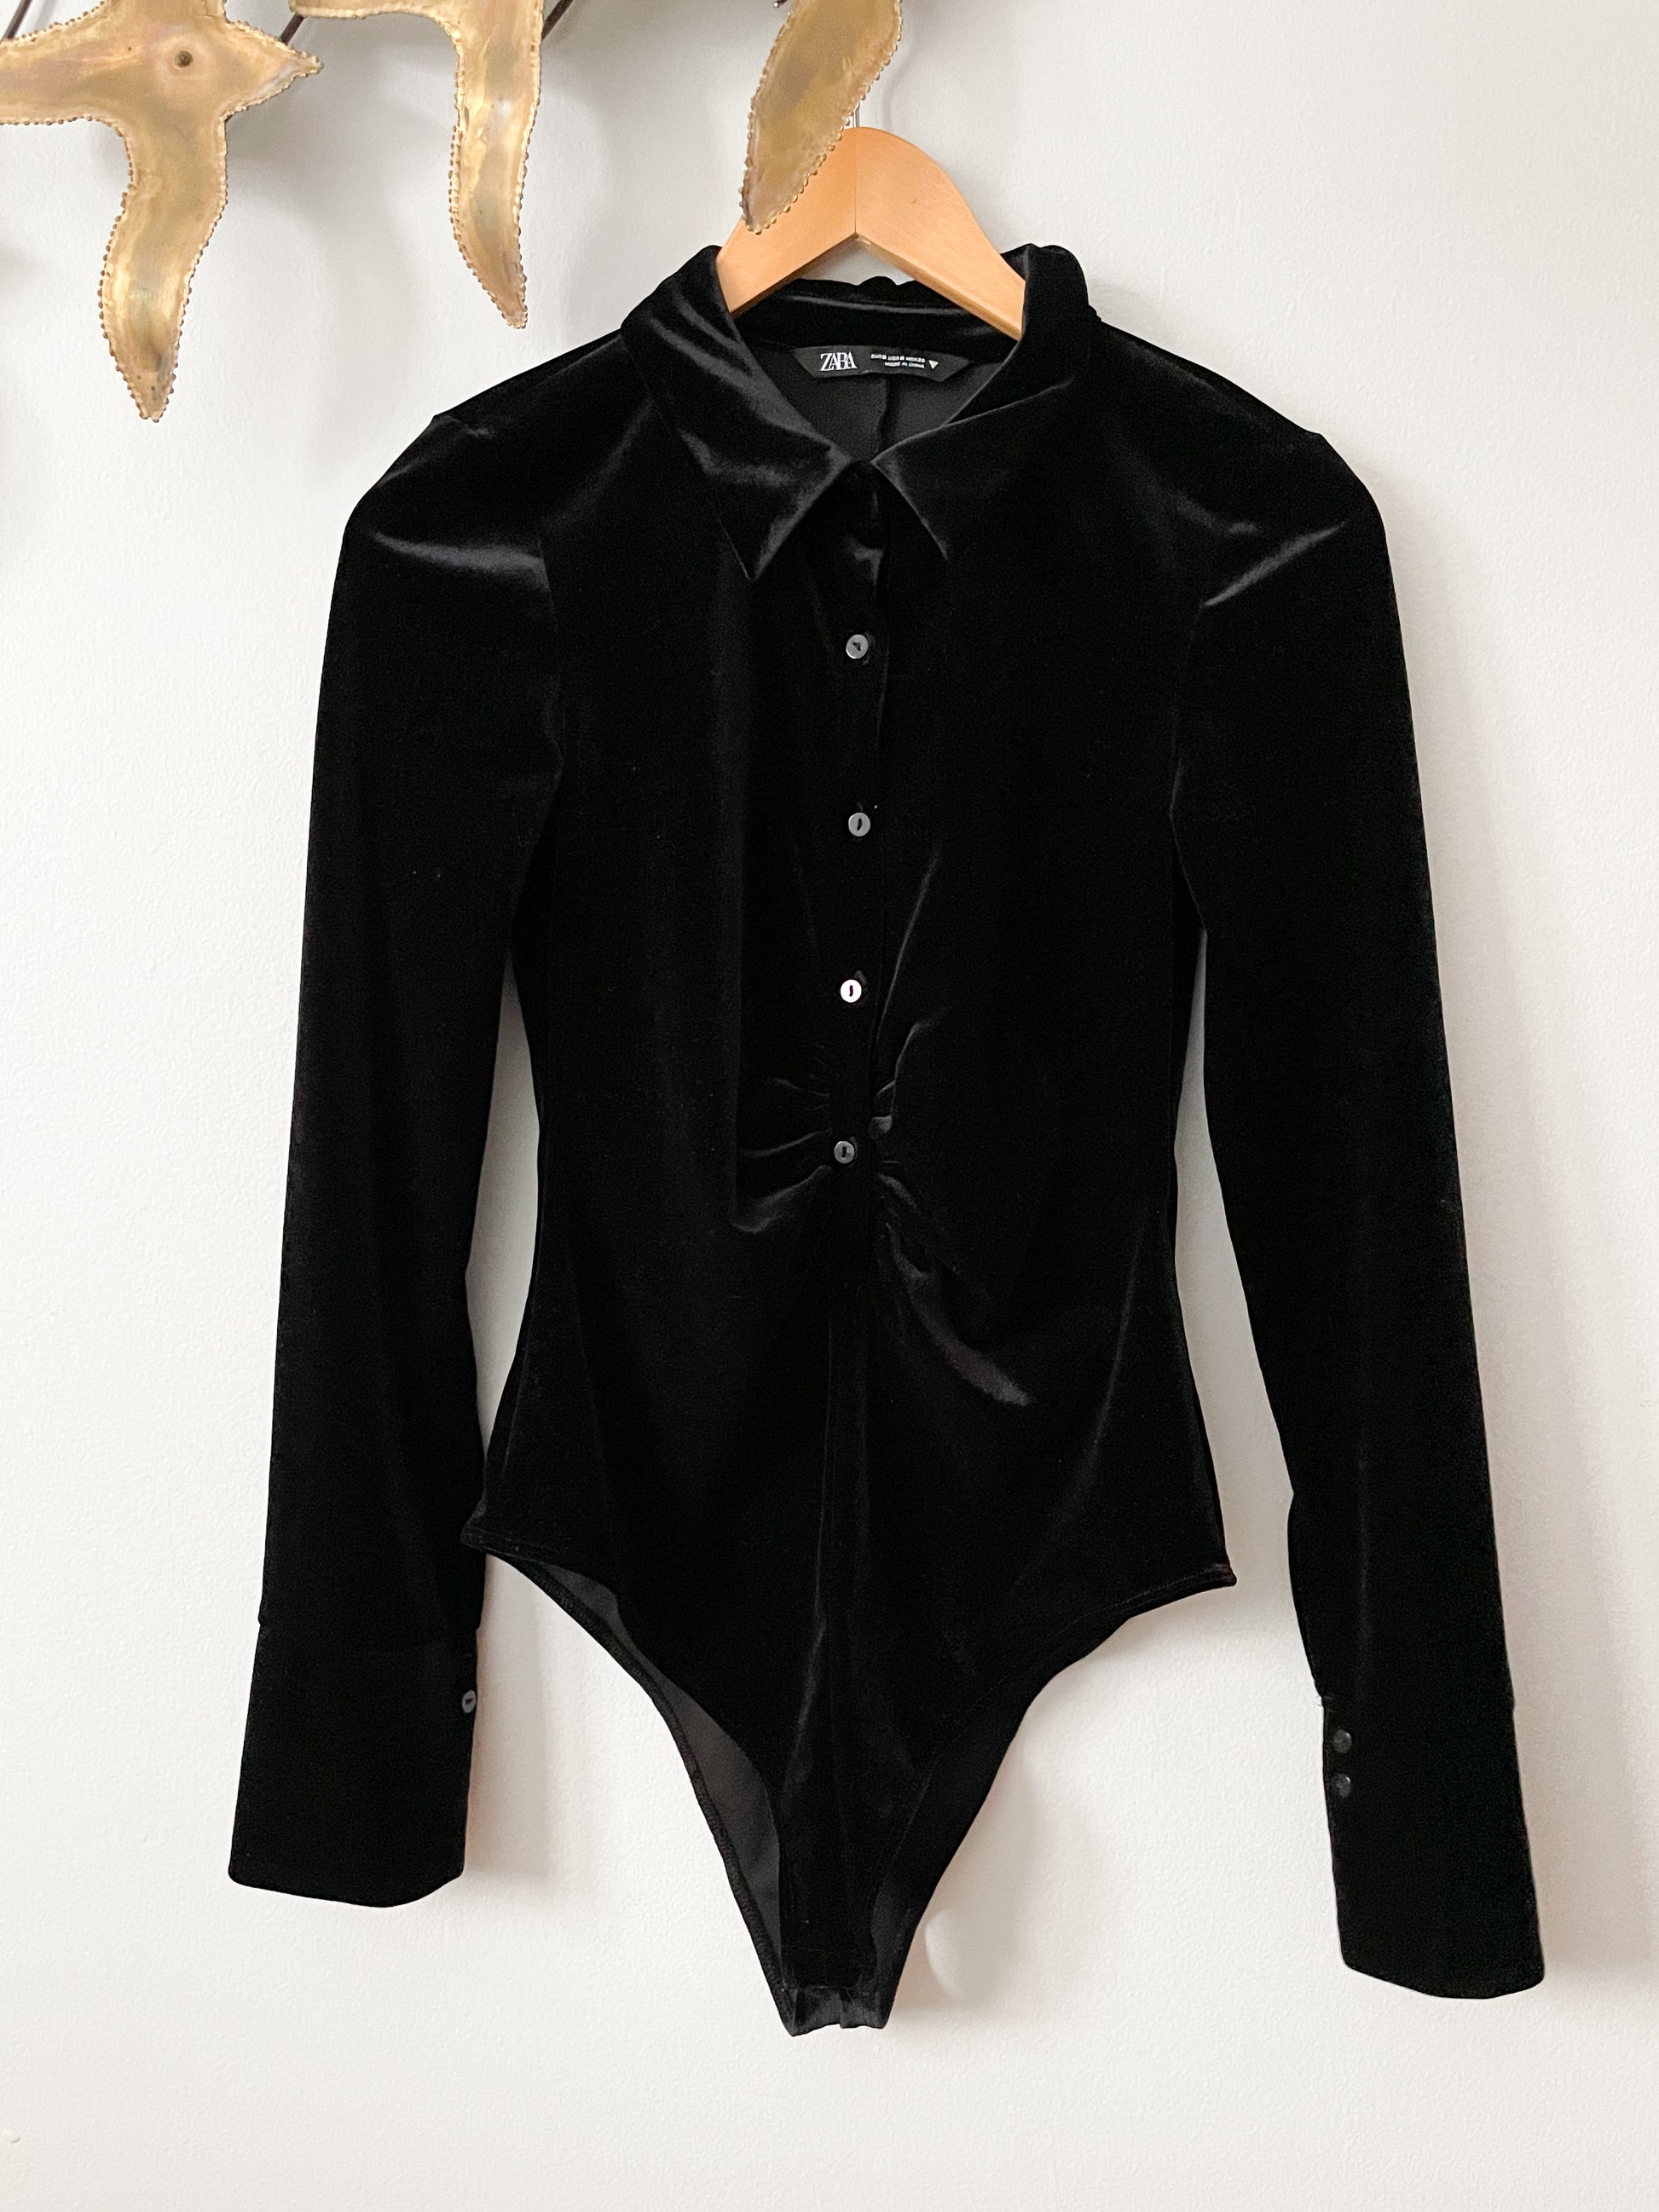 Zara Black Velvet Button Front Collared Rouched Stretch Long